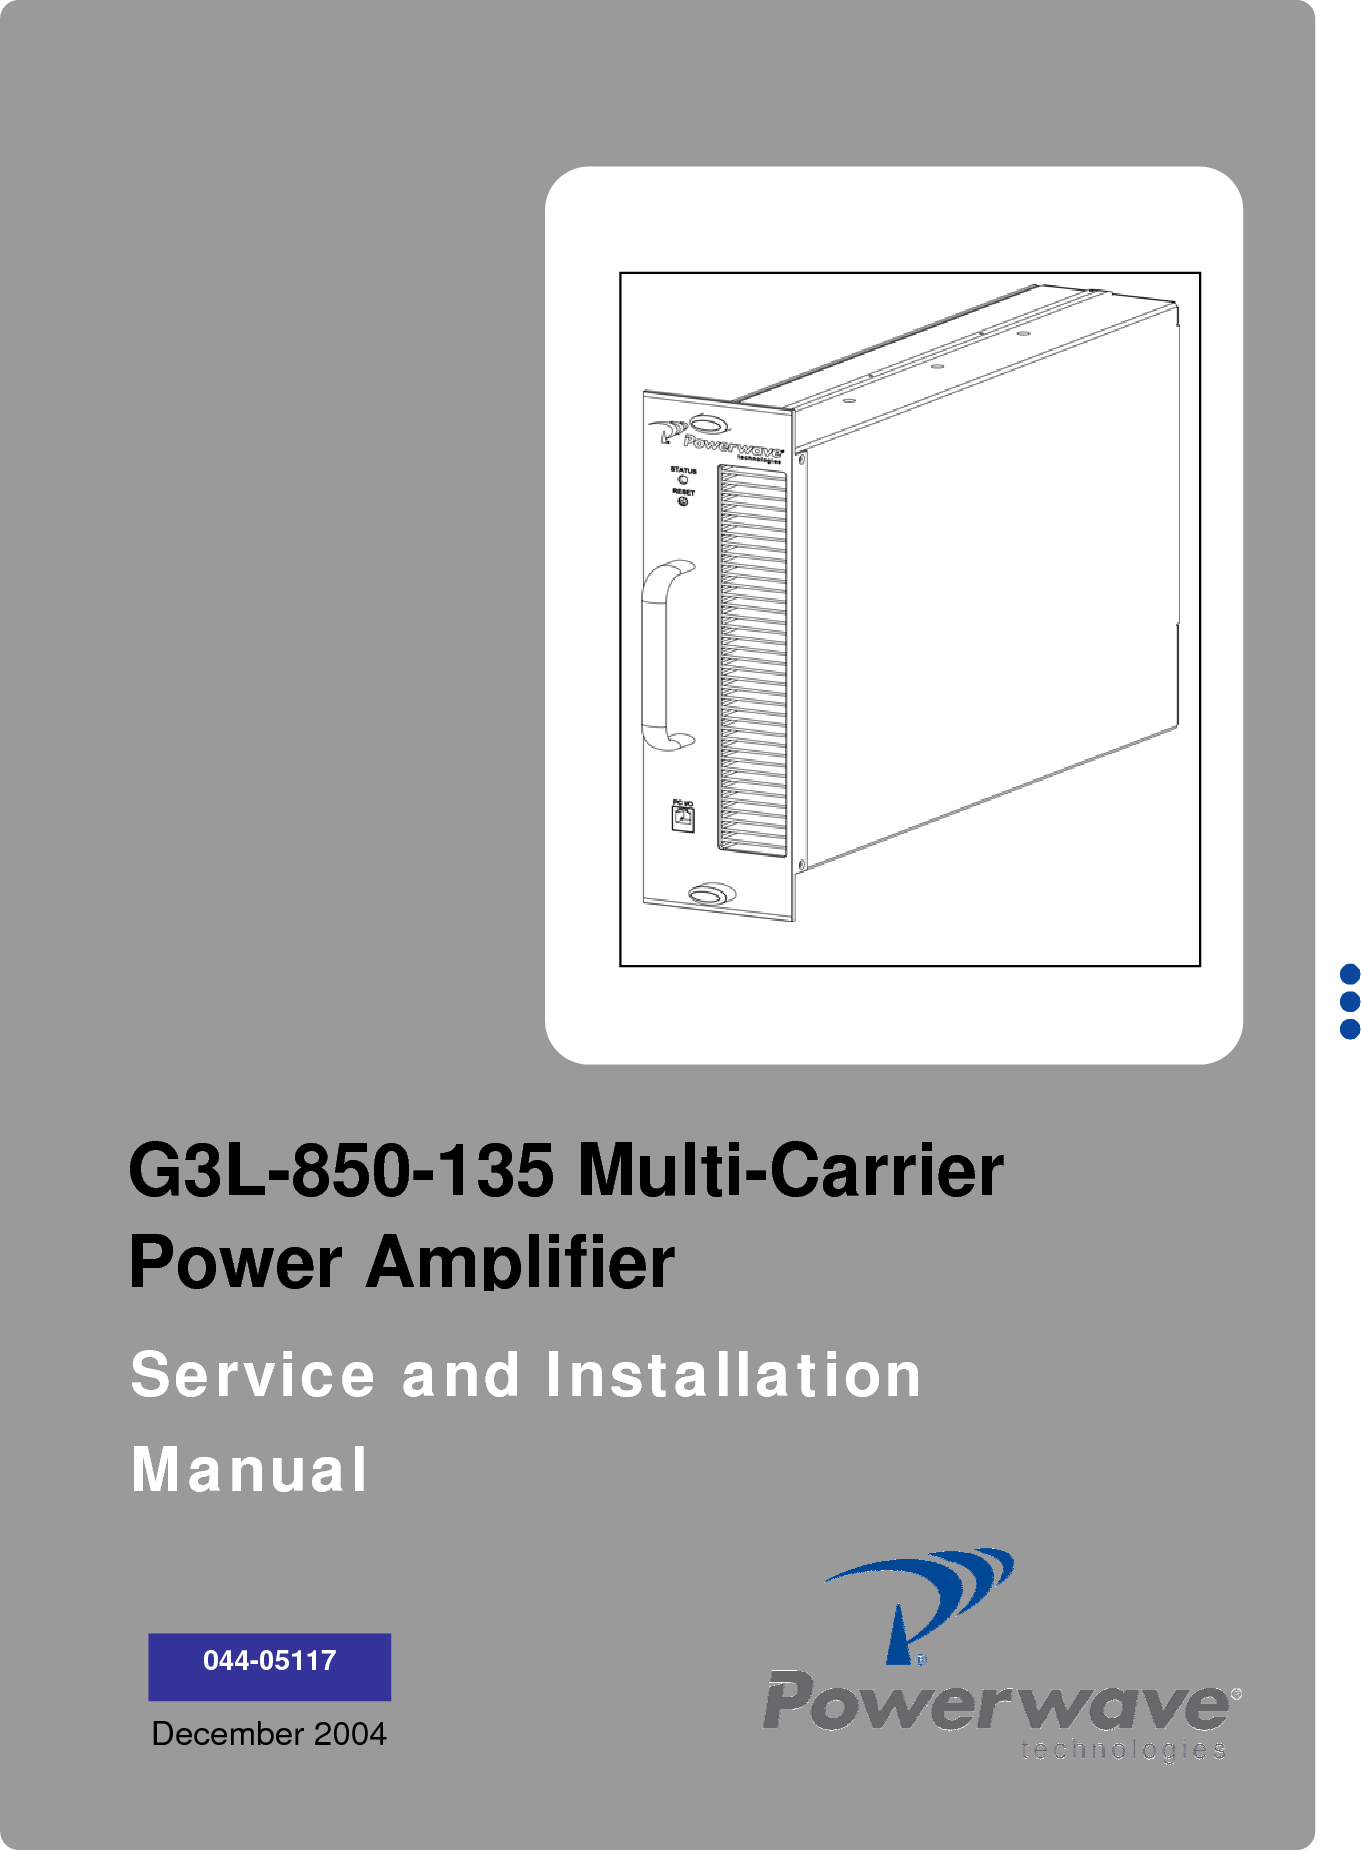     G3L-850-135 Multi-Carrier Power AmplifierService and Installation Manual 044-05117 December 2004 